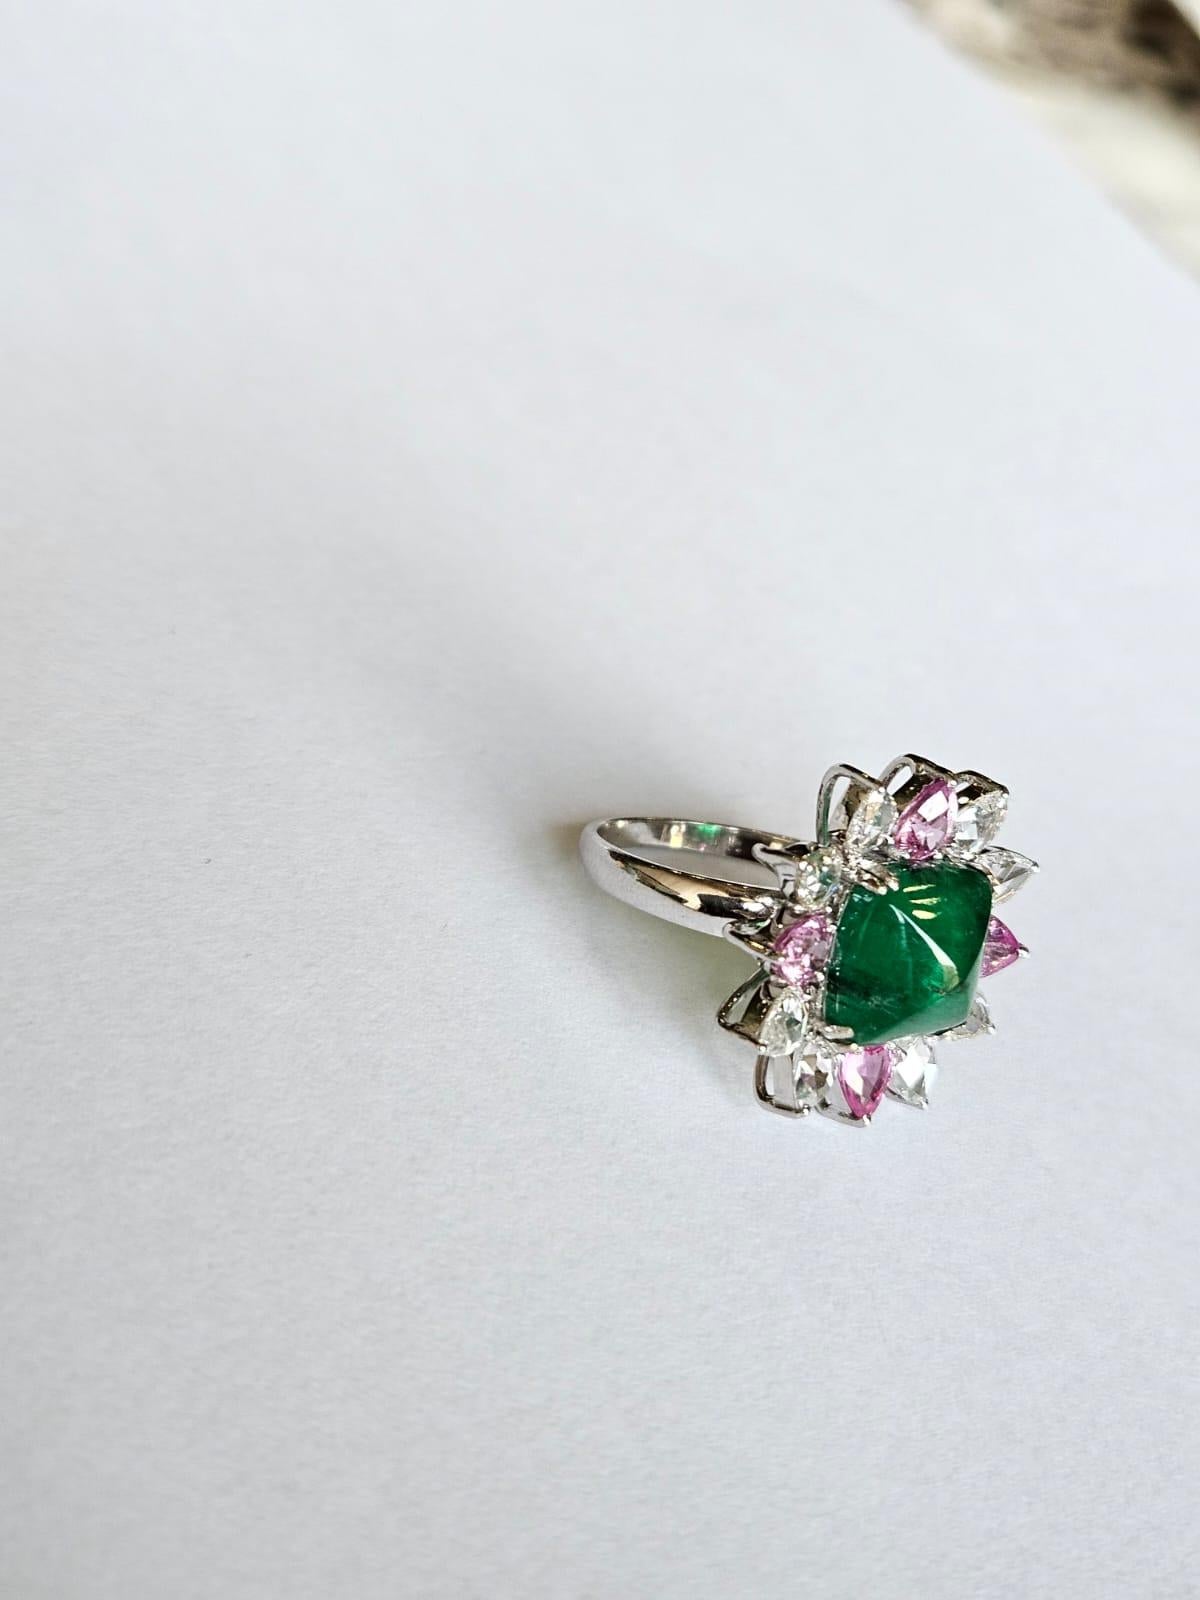 Sugarloaf Cabochon Zambian Emerald Cabochon, Pink Sapphires & Rose Cut Diamonds Engagement Ring For Sale